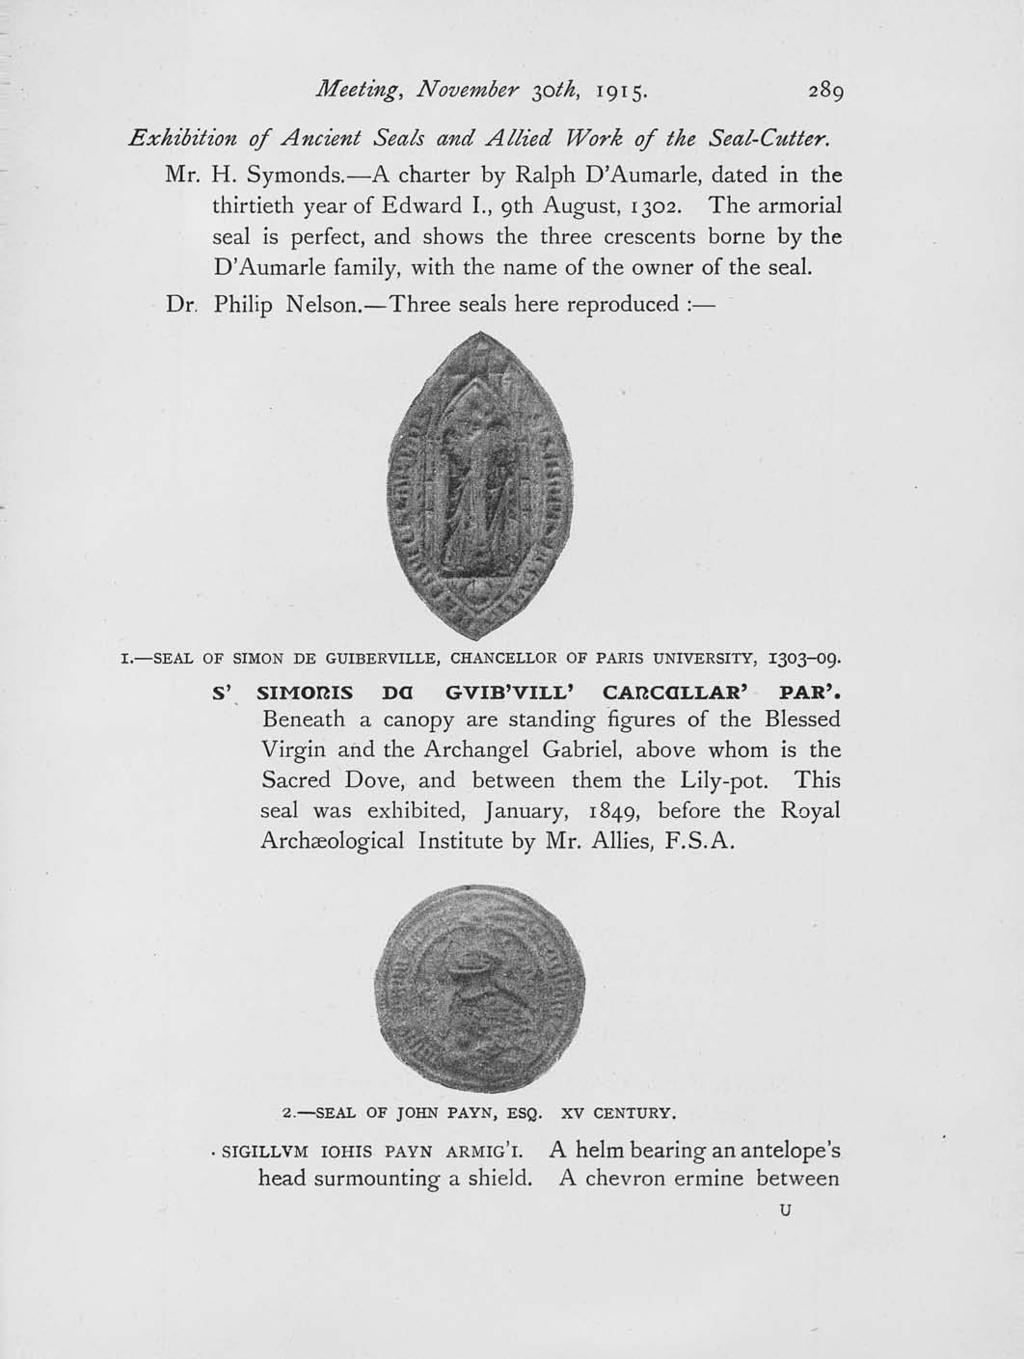 Meeting, November 30th, 1915. 28 Exhibition of Ancient Seals and Allied Work of the Seal-Cutter. Mr. H. Symonds. A charter by Ralph D'Aumarle, dated in the thirtieth year of Edward I.